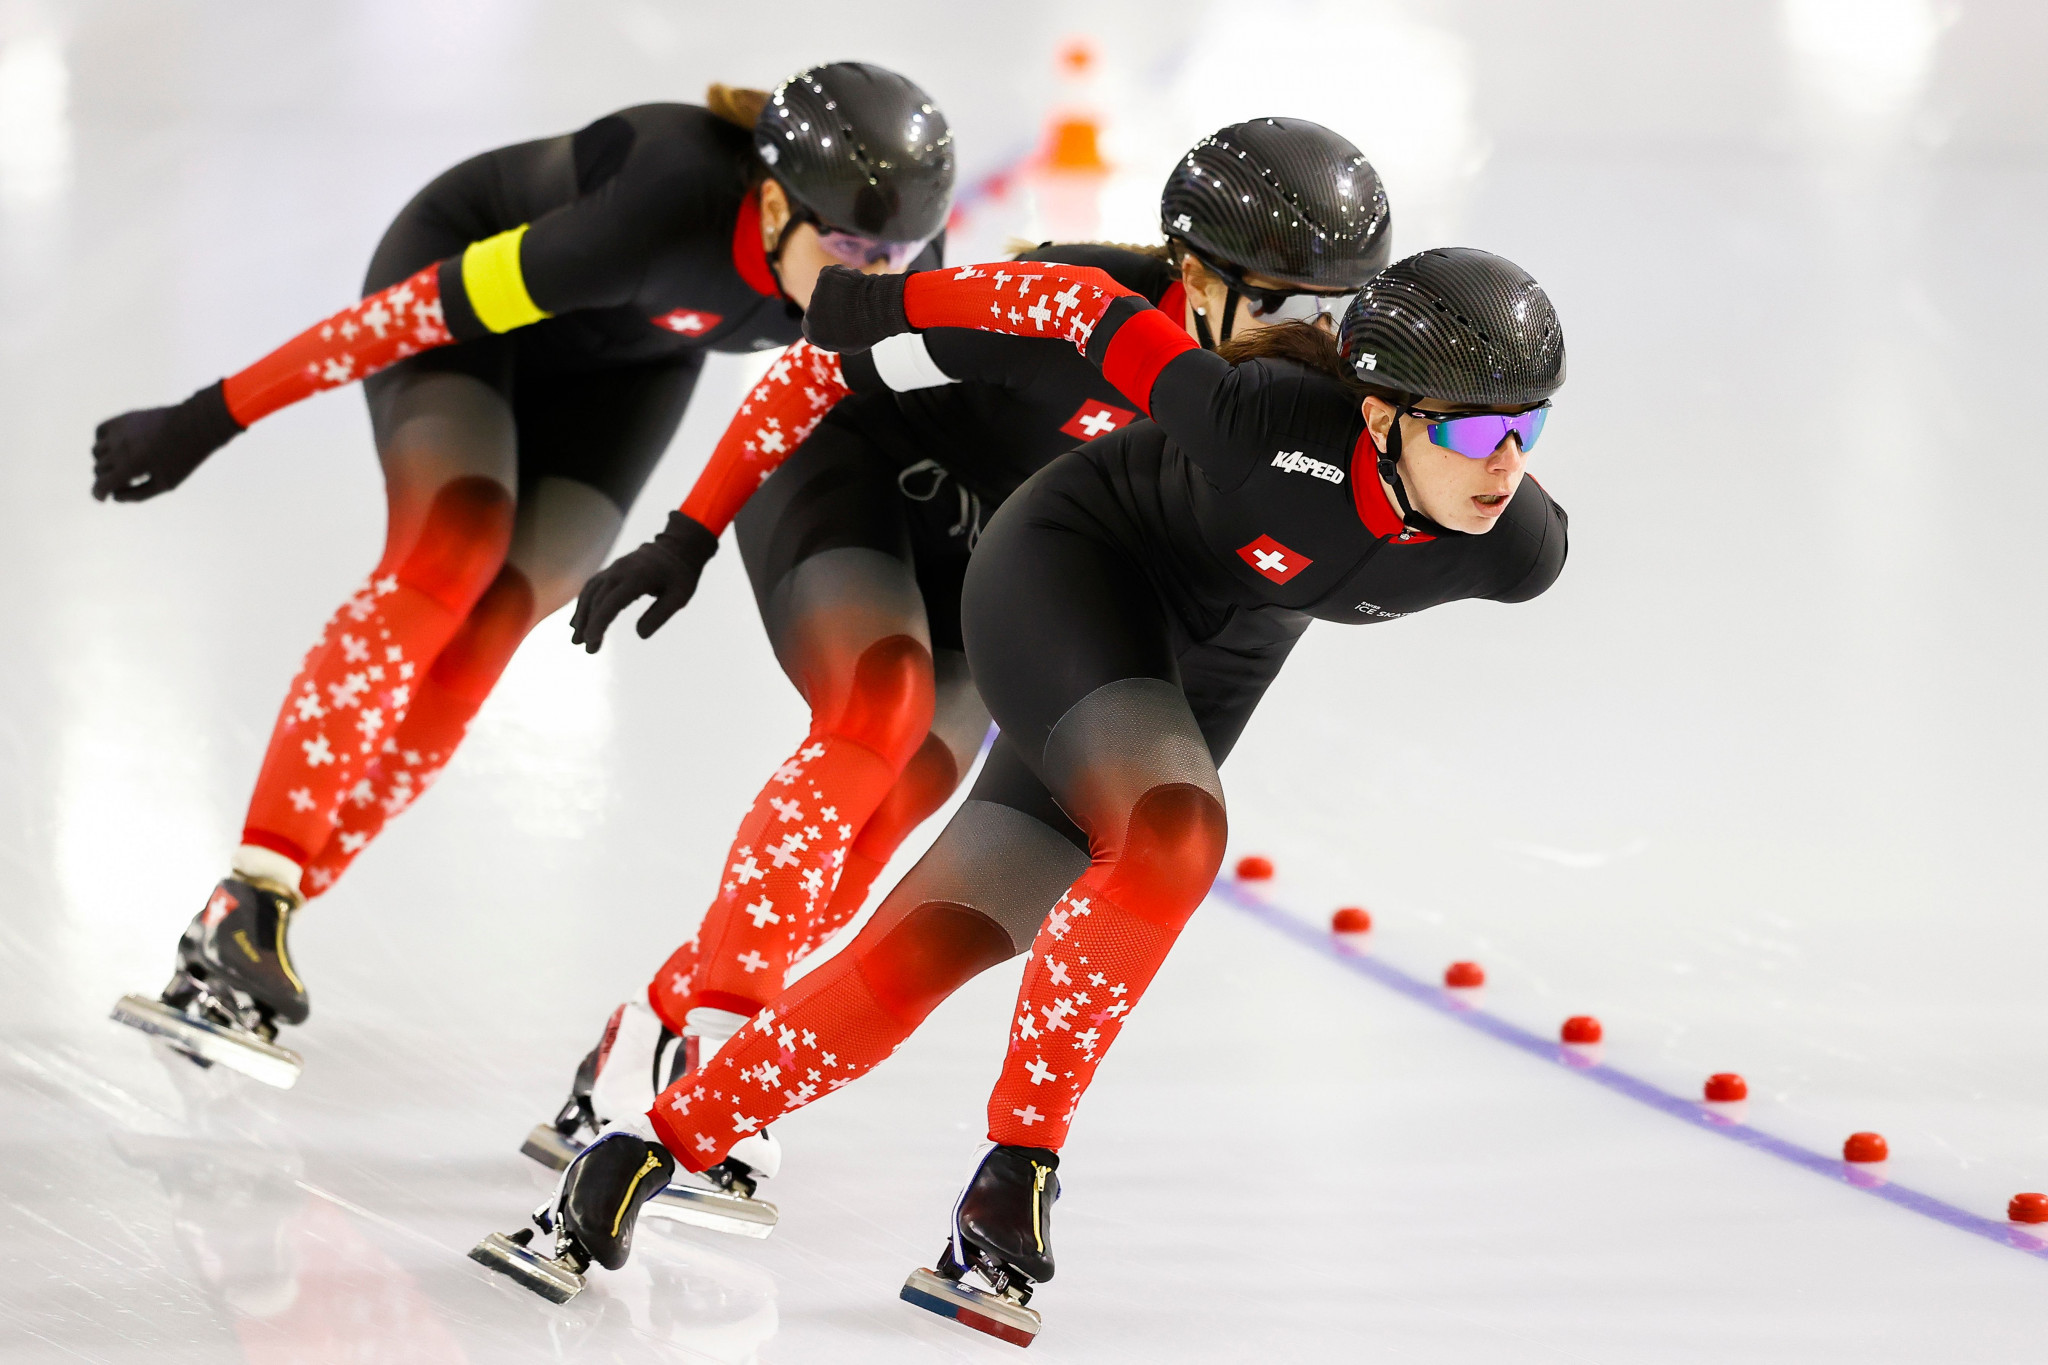 Competition is underway this weekend at the Heerenveen track as it hosts the second ISU Speed Skating World Cup event of the season ©Getty Images